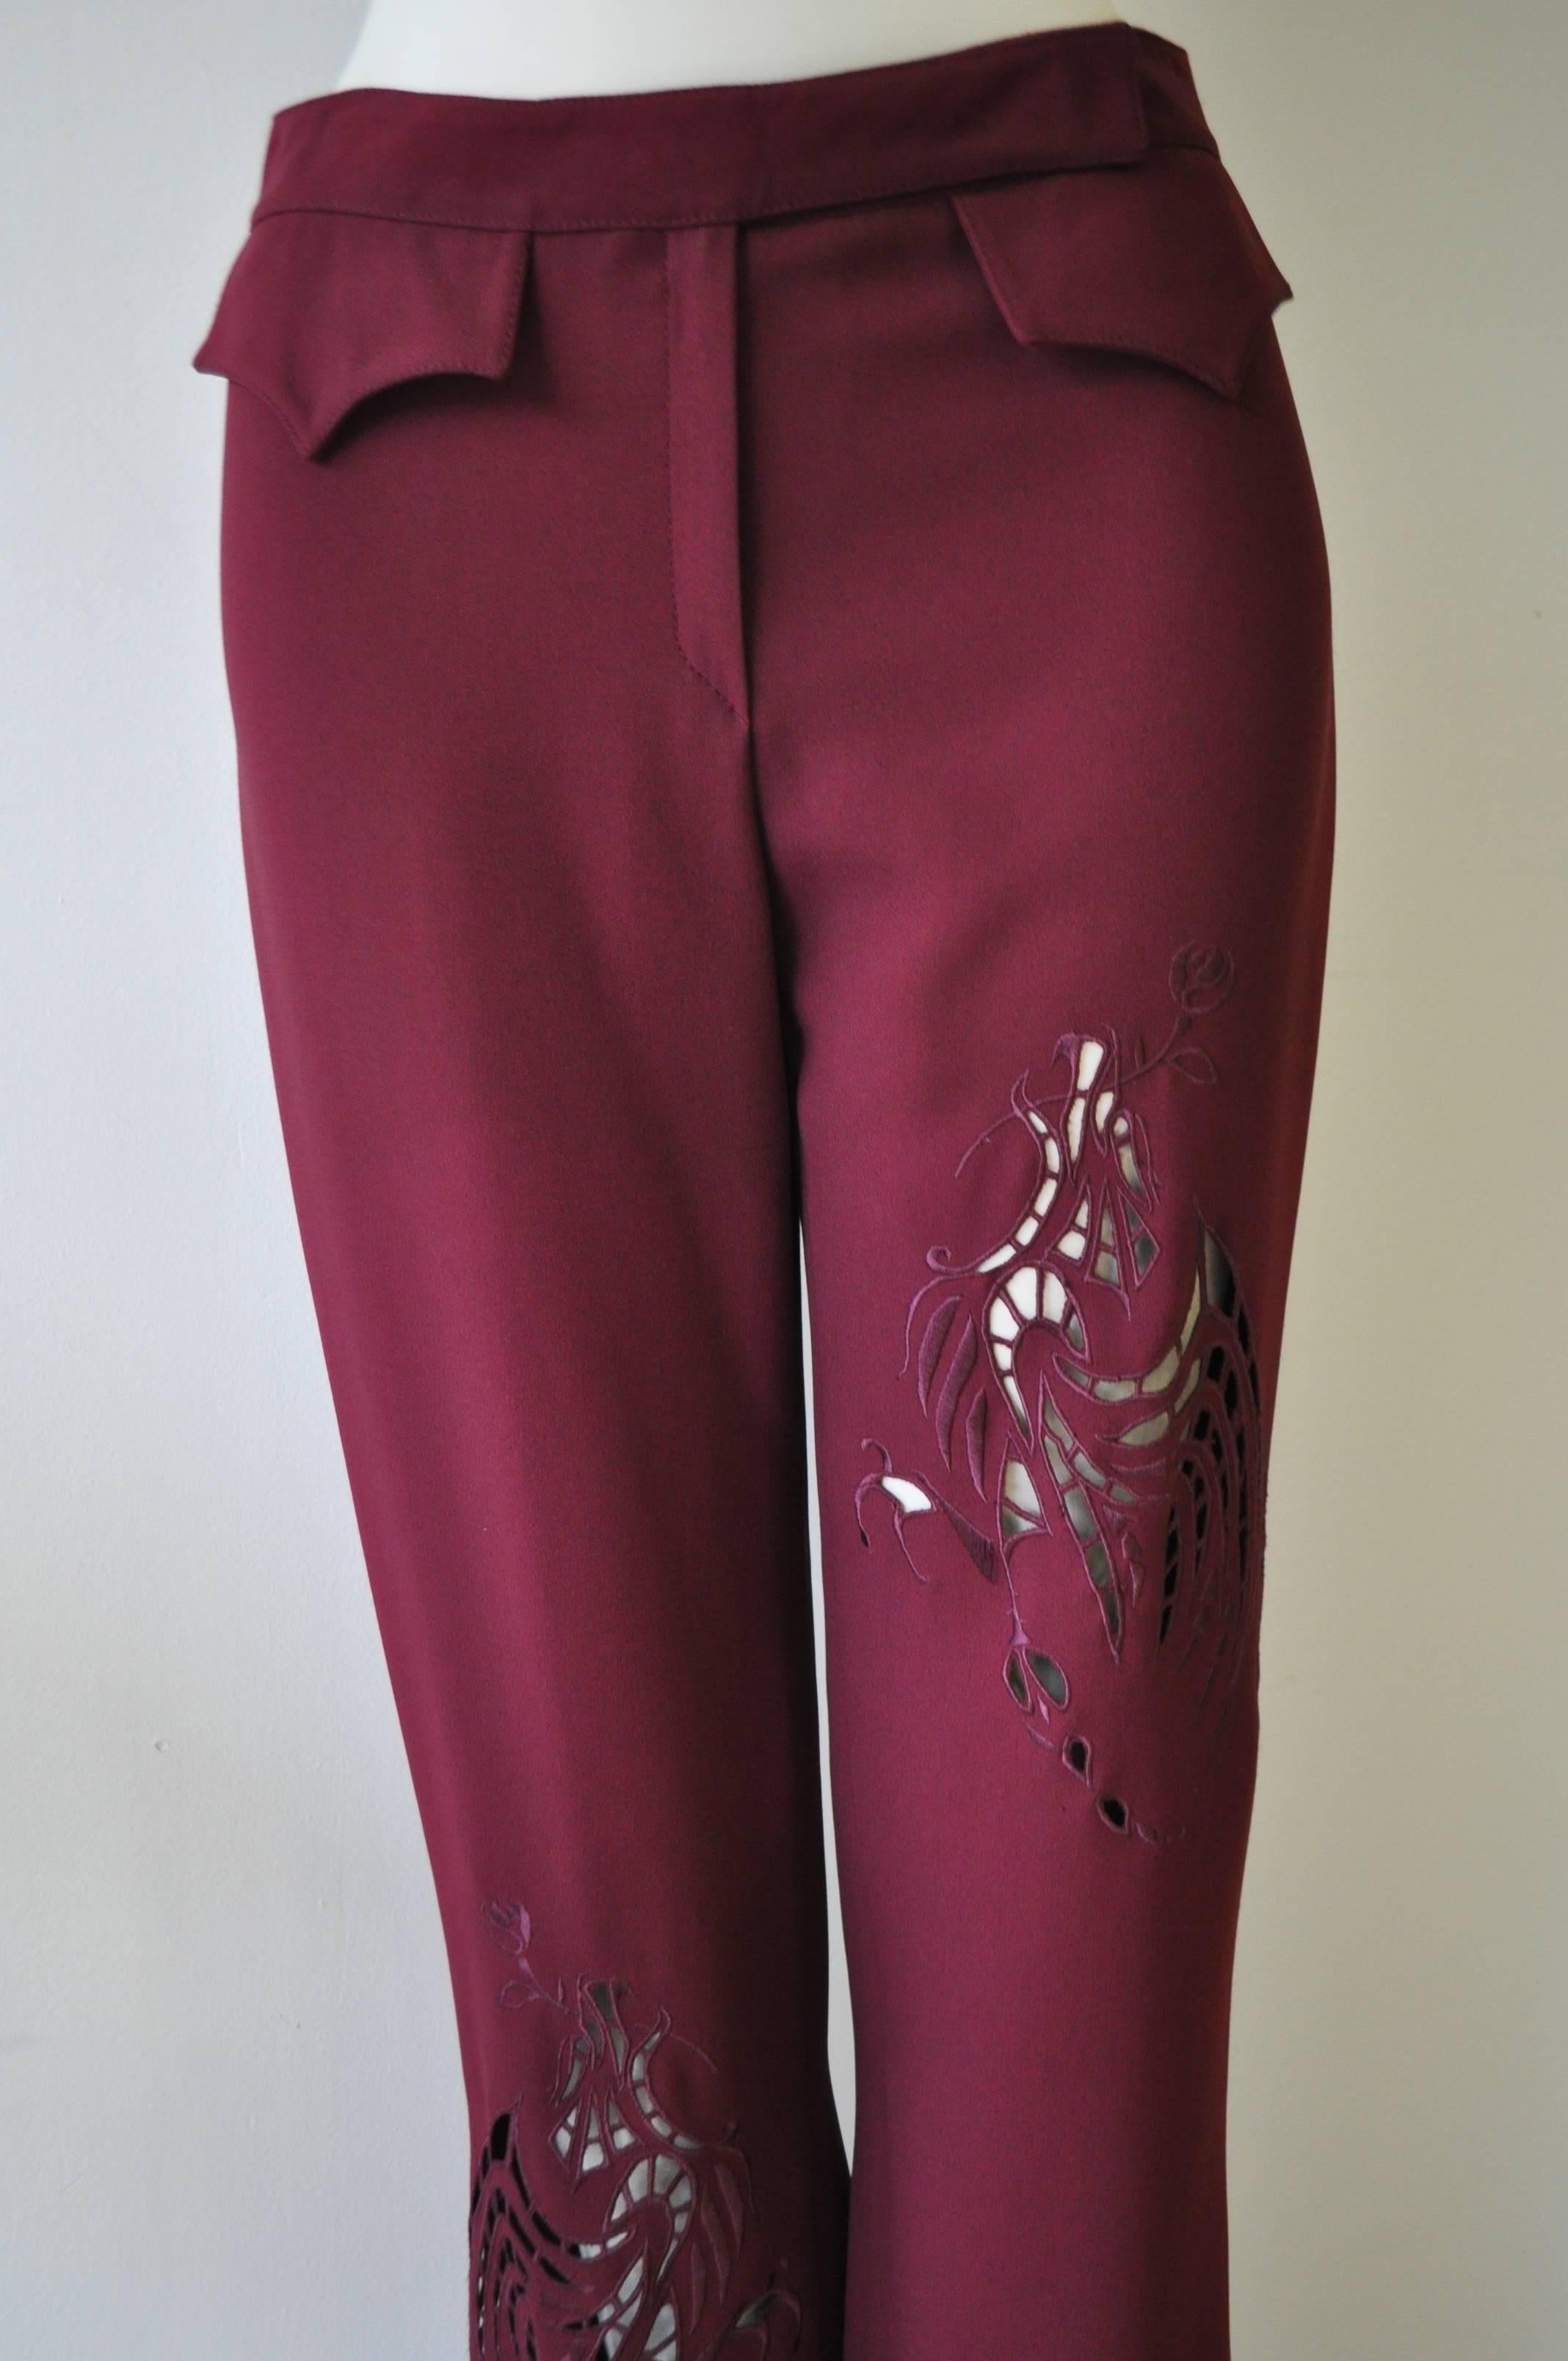 Angelo Mozzillo Highly Original Embroidered Laser-Cut Pants